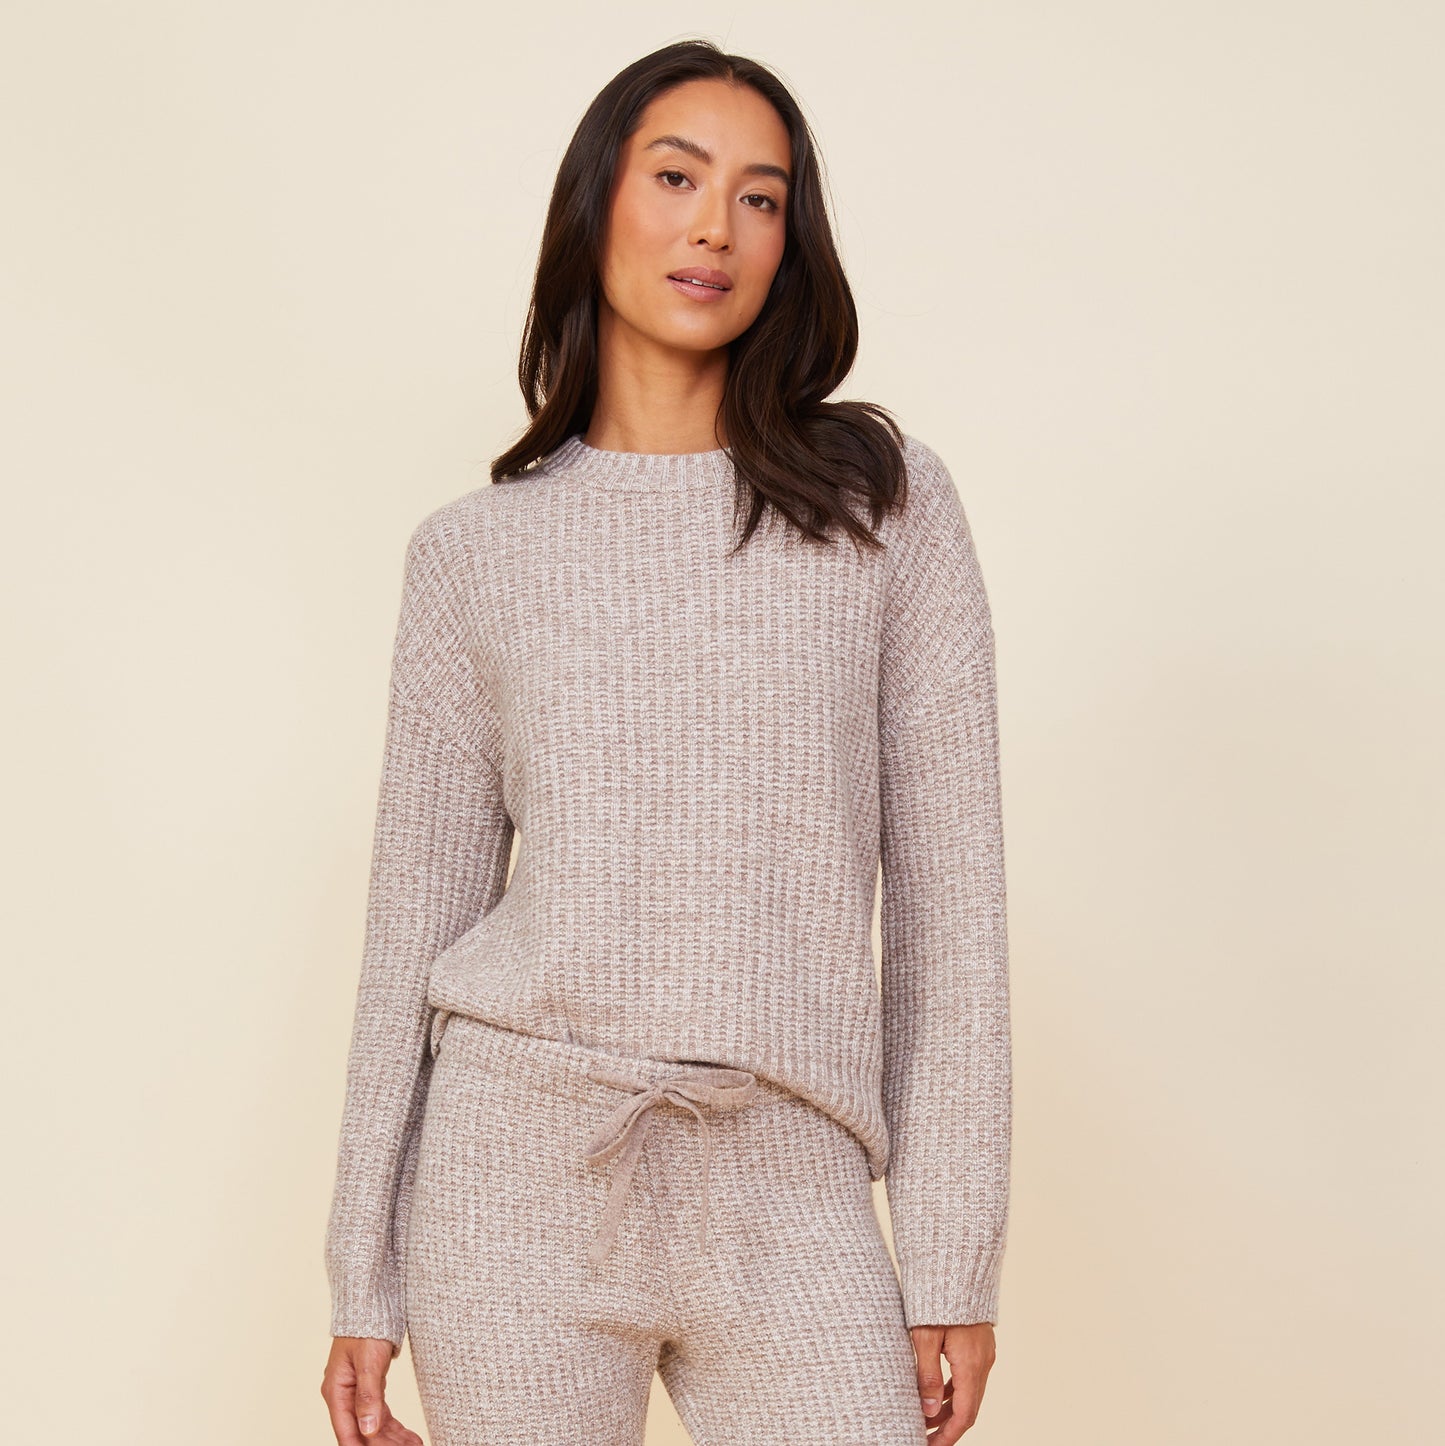 Wool Cashmere Space Dye Sweater